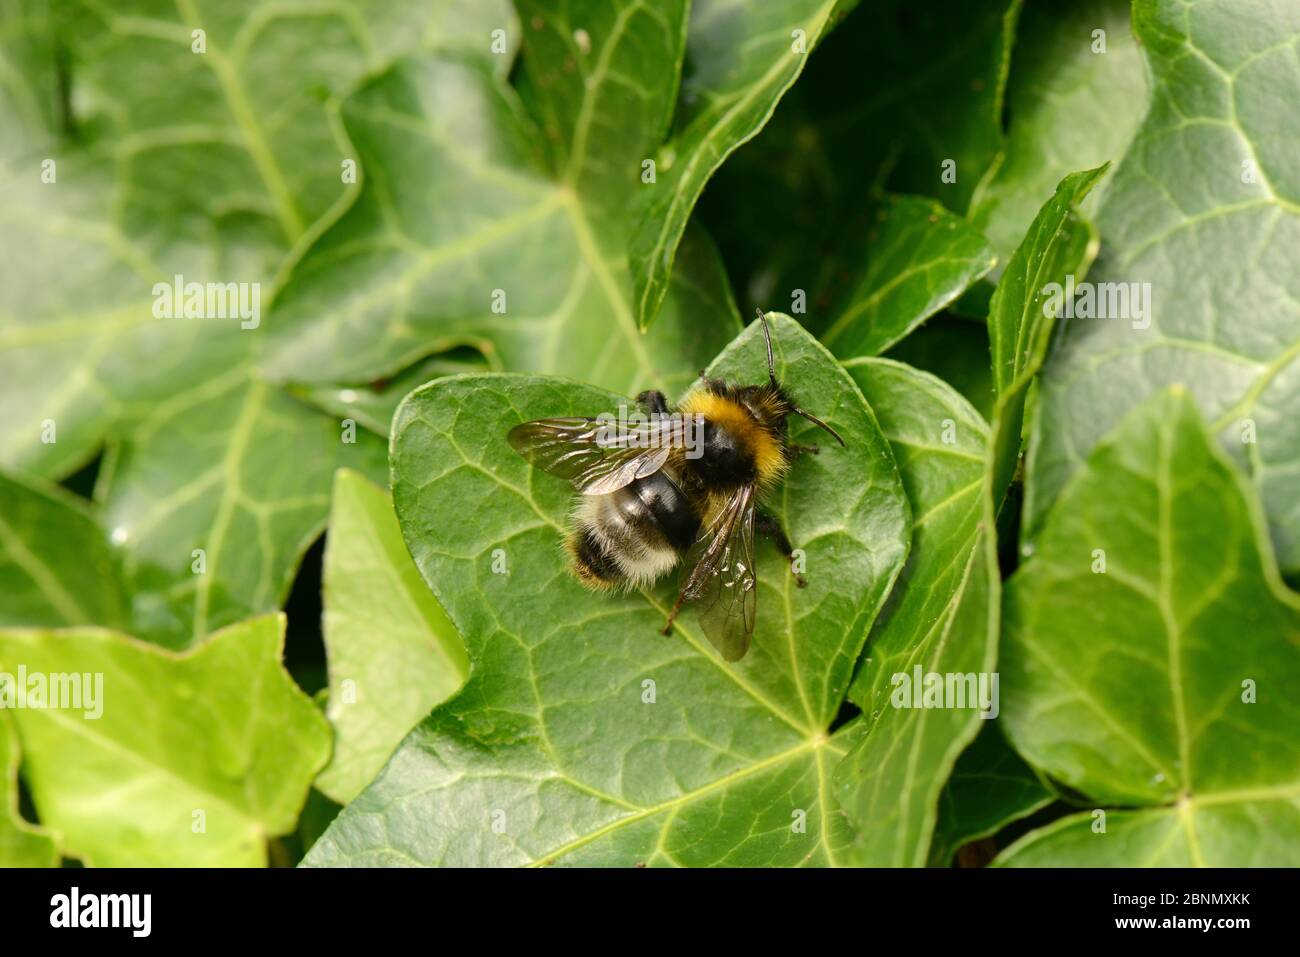 Male Forest Cuckoo Bumblebee (Bombus sylvestris) on Ivy (Hedera helix), Herefordshire, England. Stock Photo